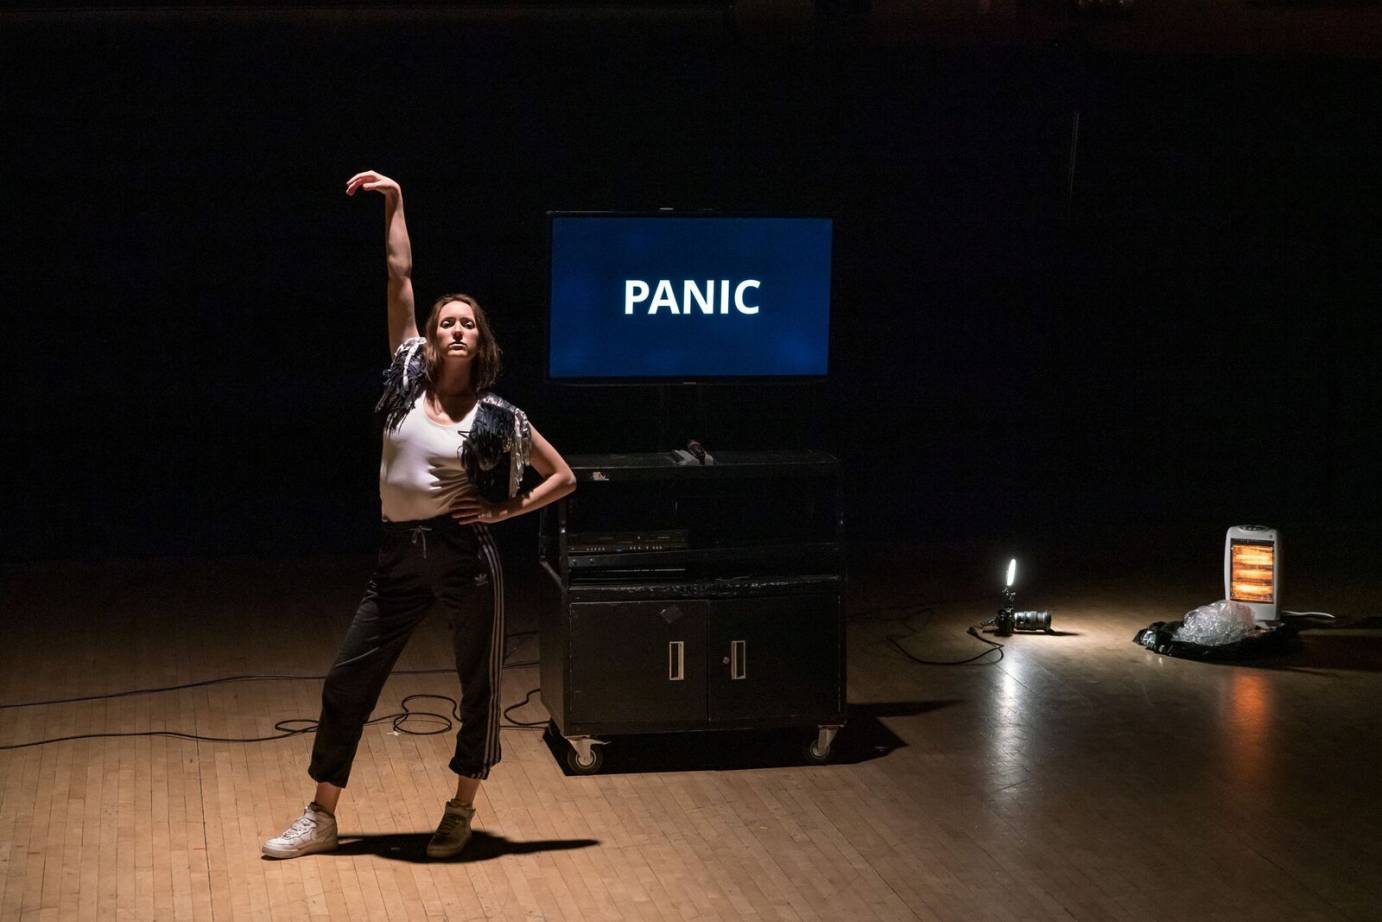 A woman strikes a disco pose in front of a video that says PANIC